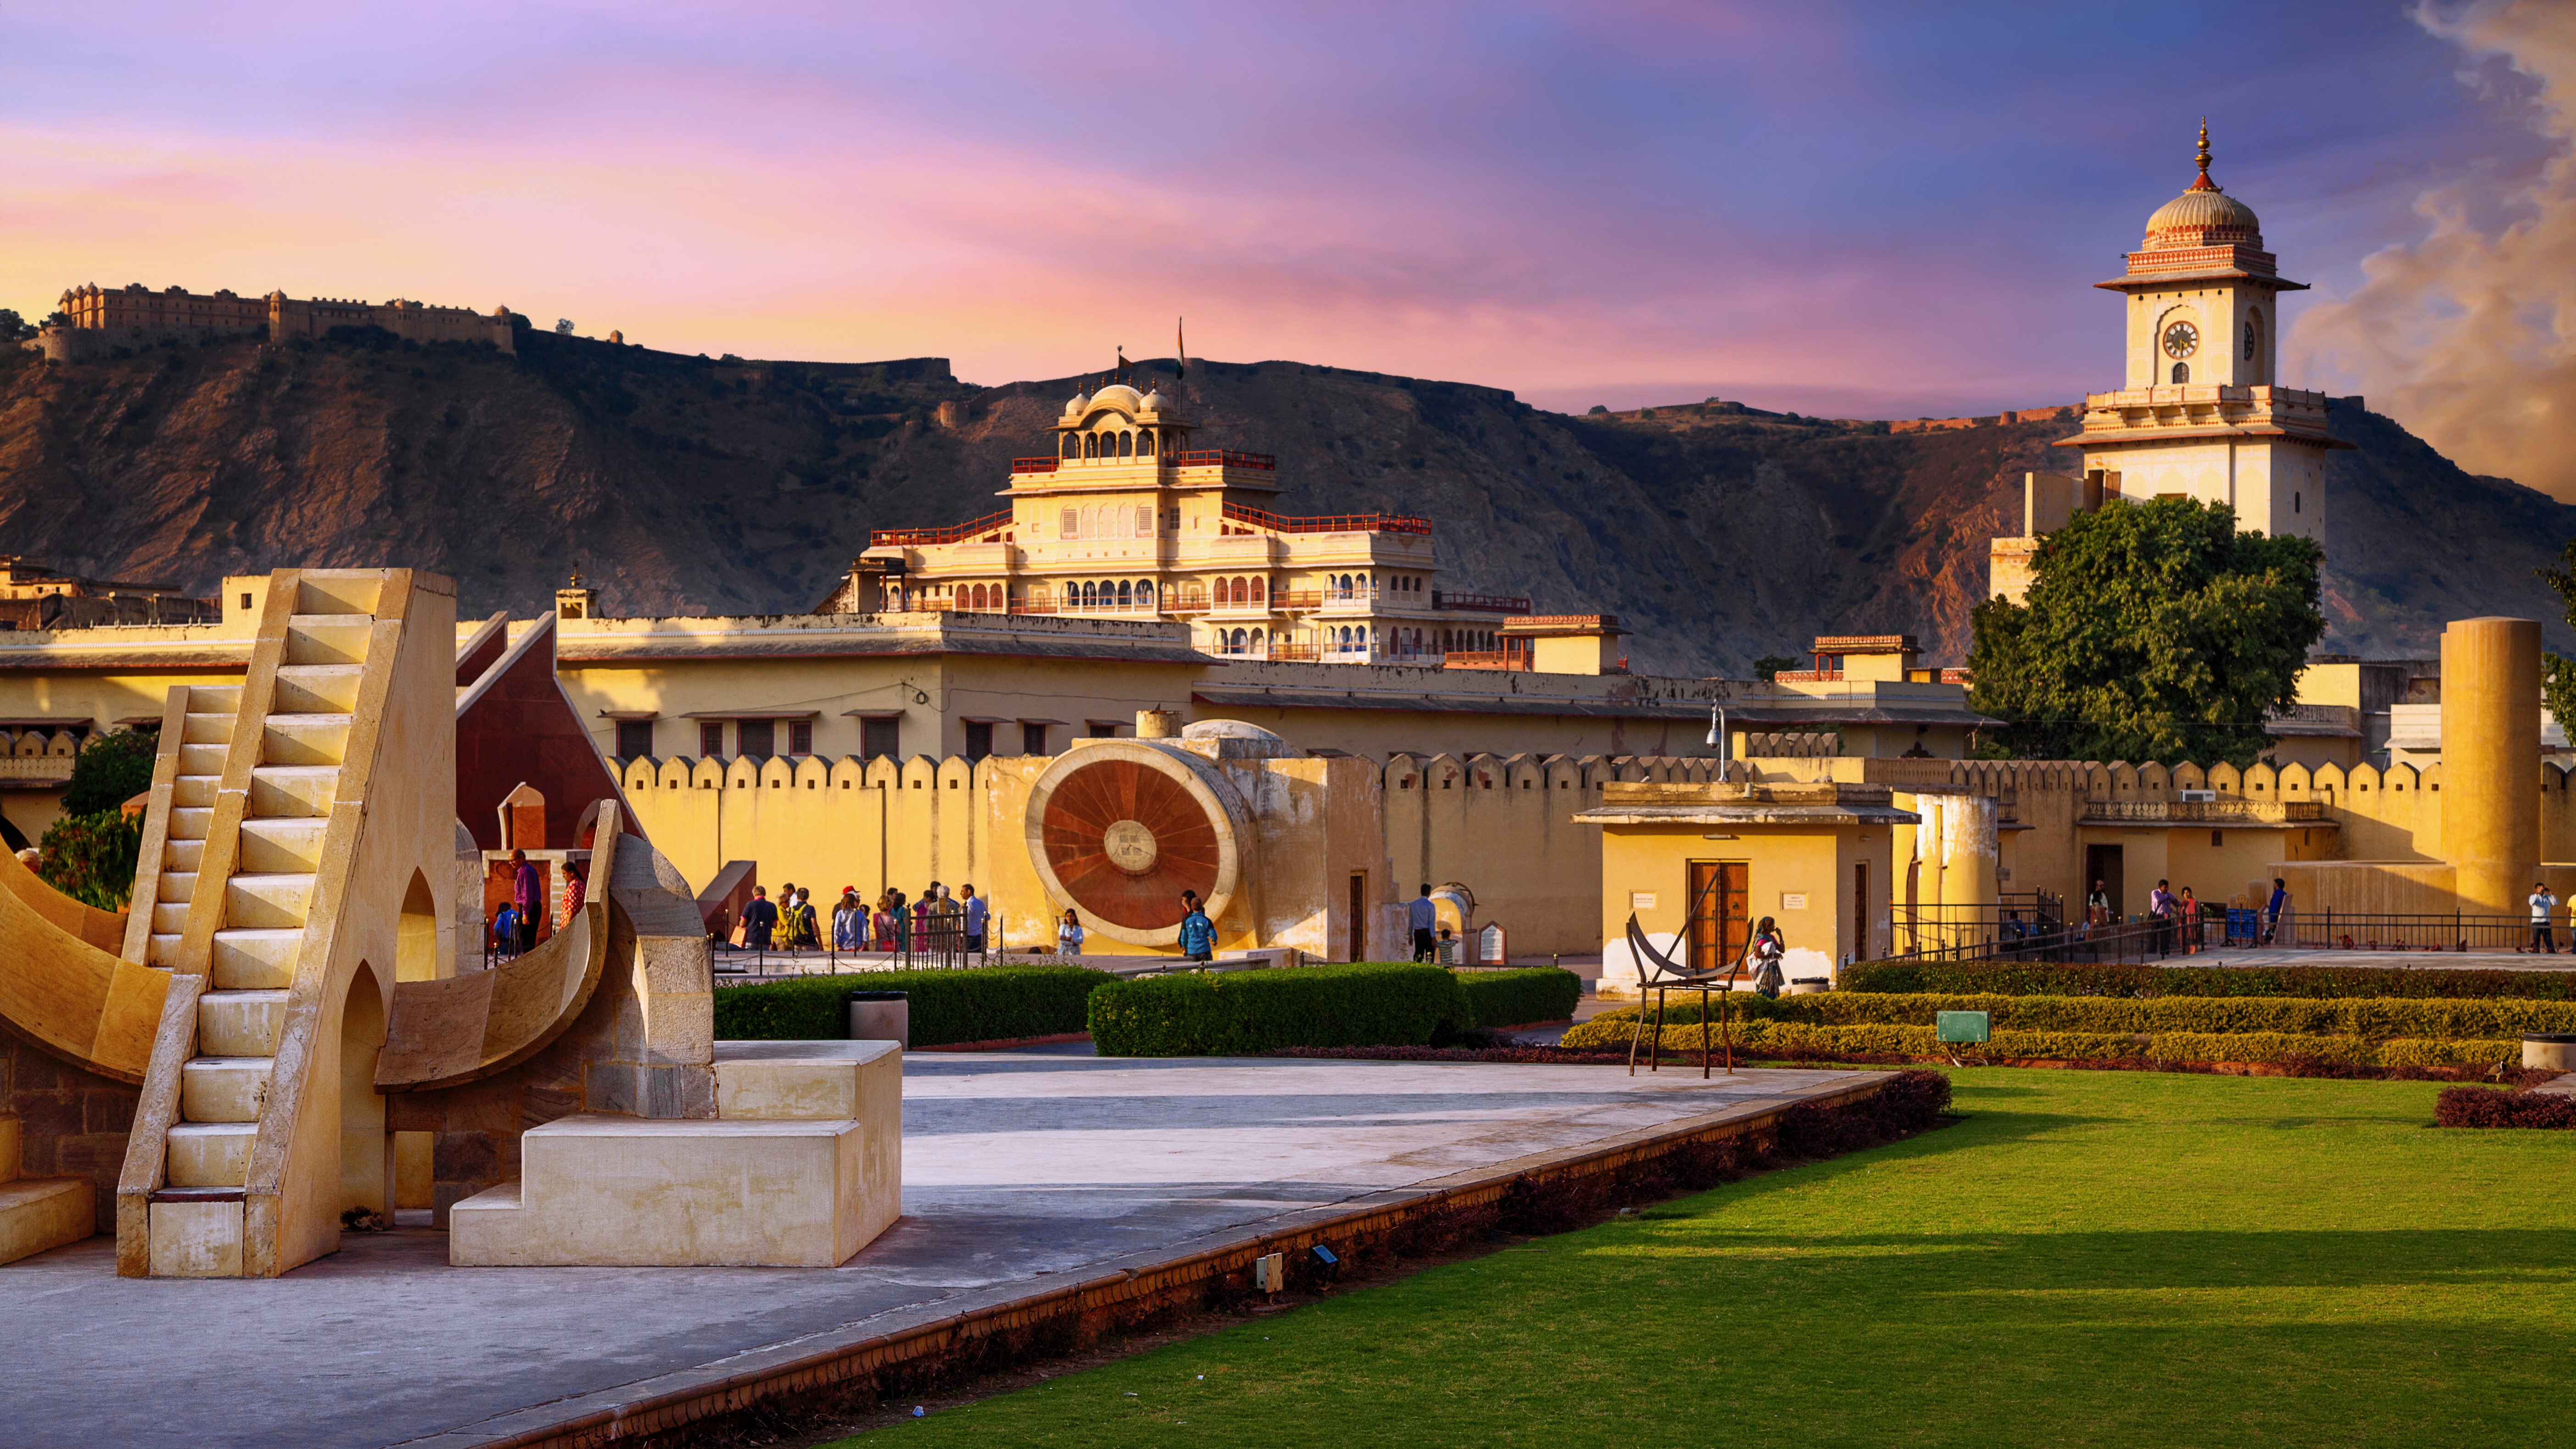 The Jantar Mantar observatory at Jaipur in India was completed in 1734.